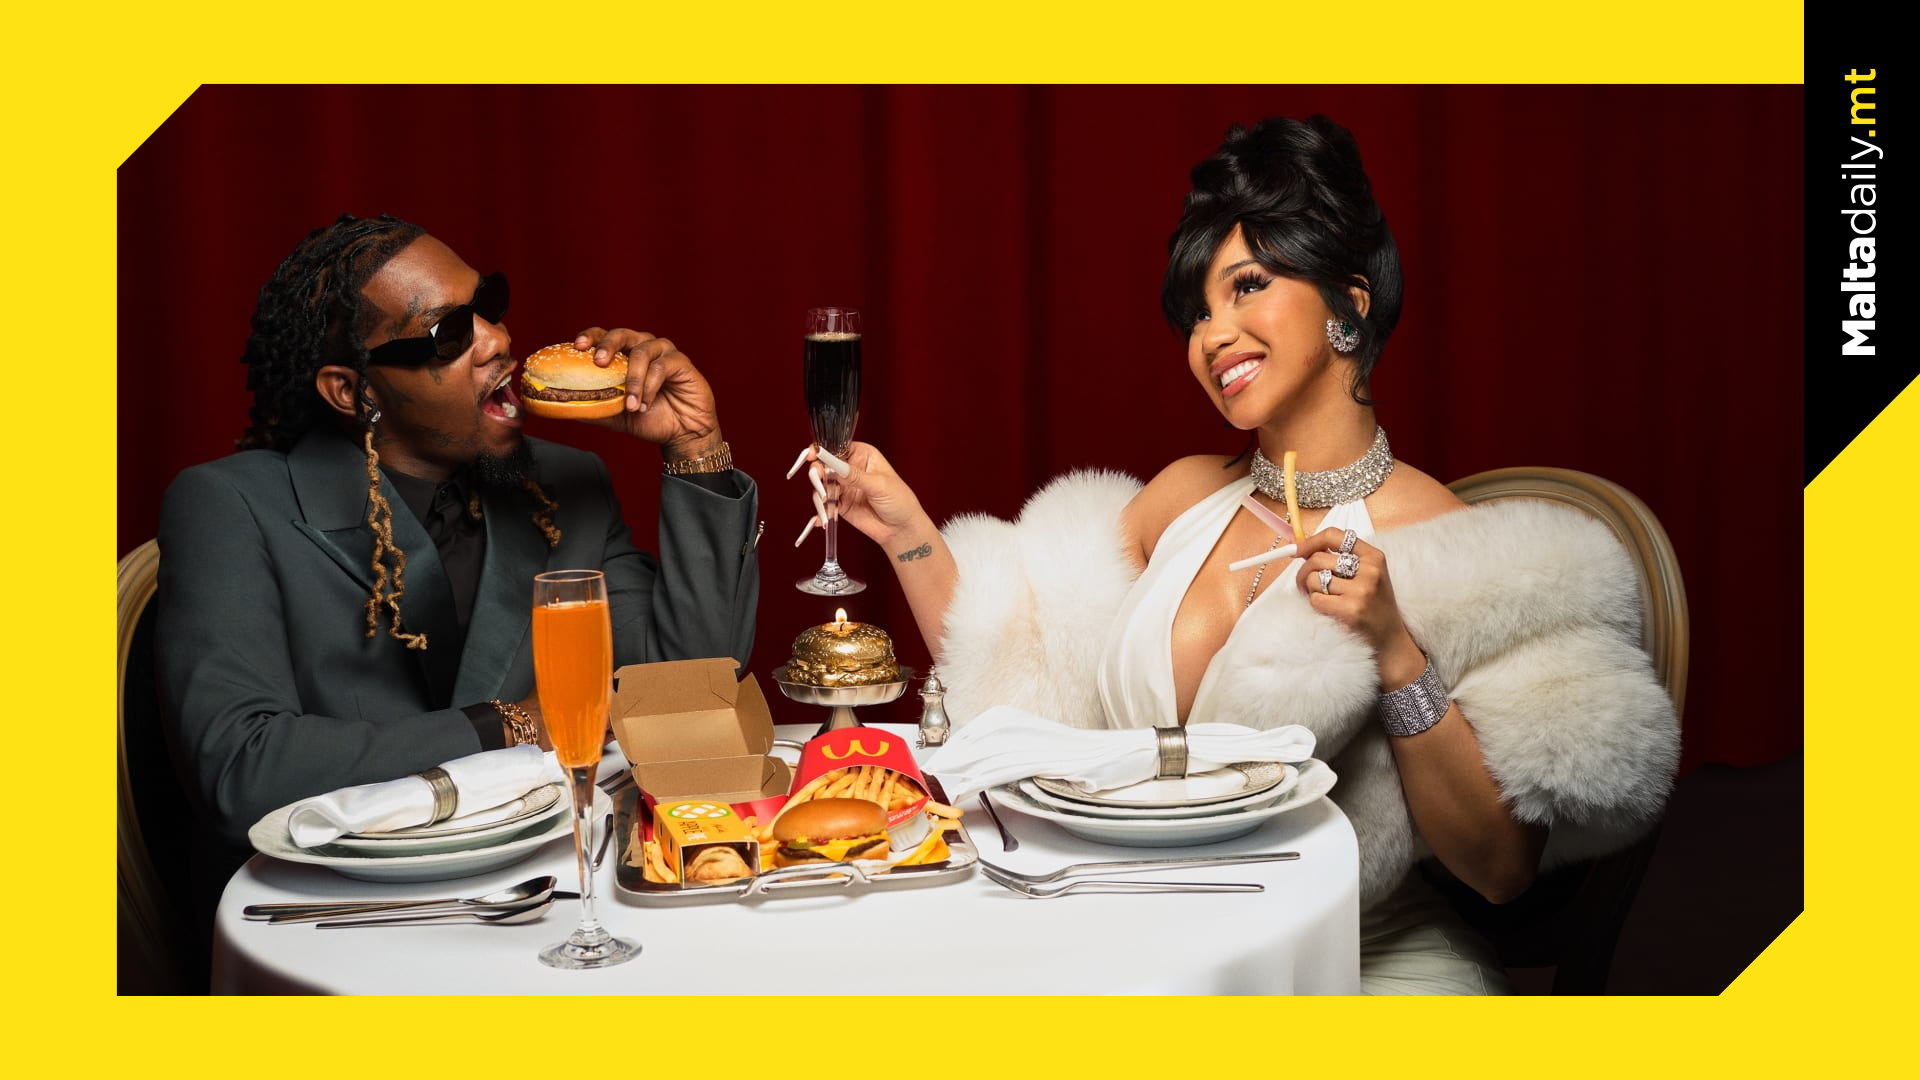 Cardi B and Offset join McDonald's US to launch Valentine's meal for 2